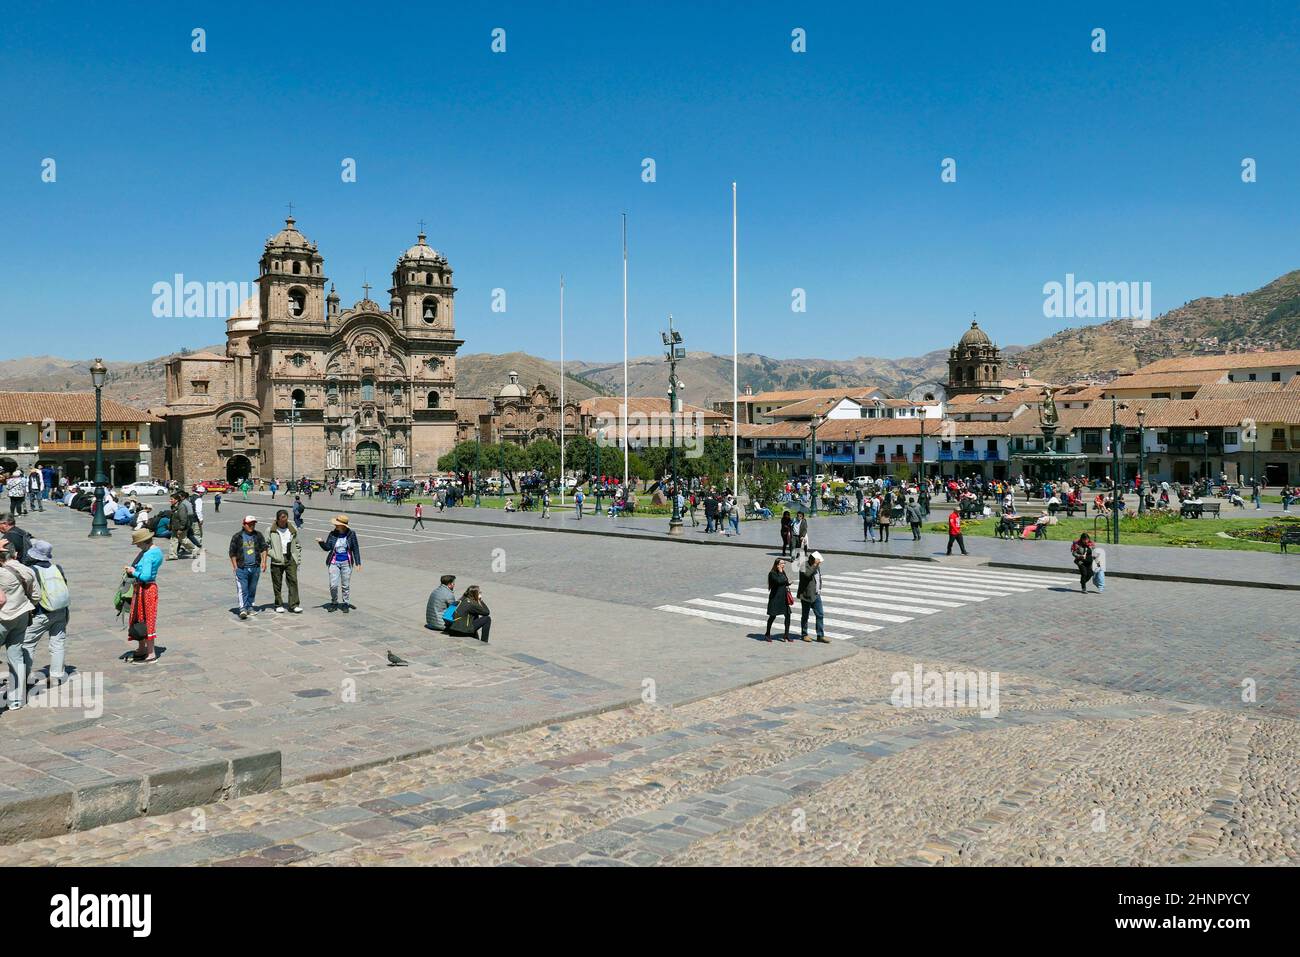 The main square of Cusco, Plaza de Armas with its famous landmark, Cusco Cathedral, Cusco, Peru, South America Stock Photo